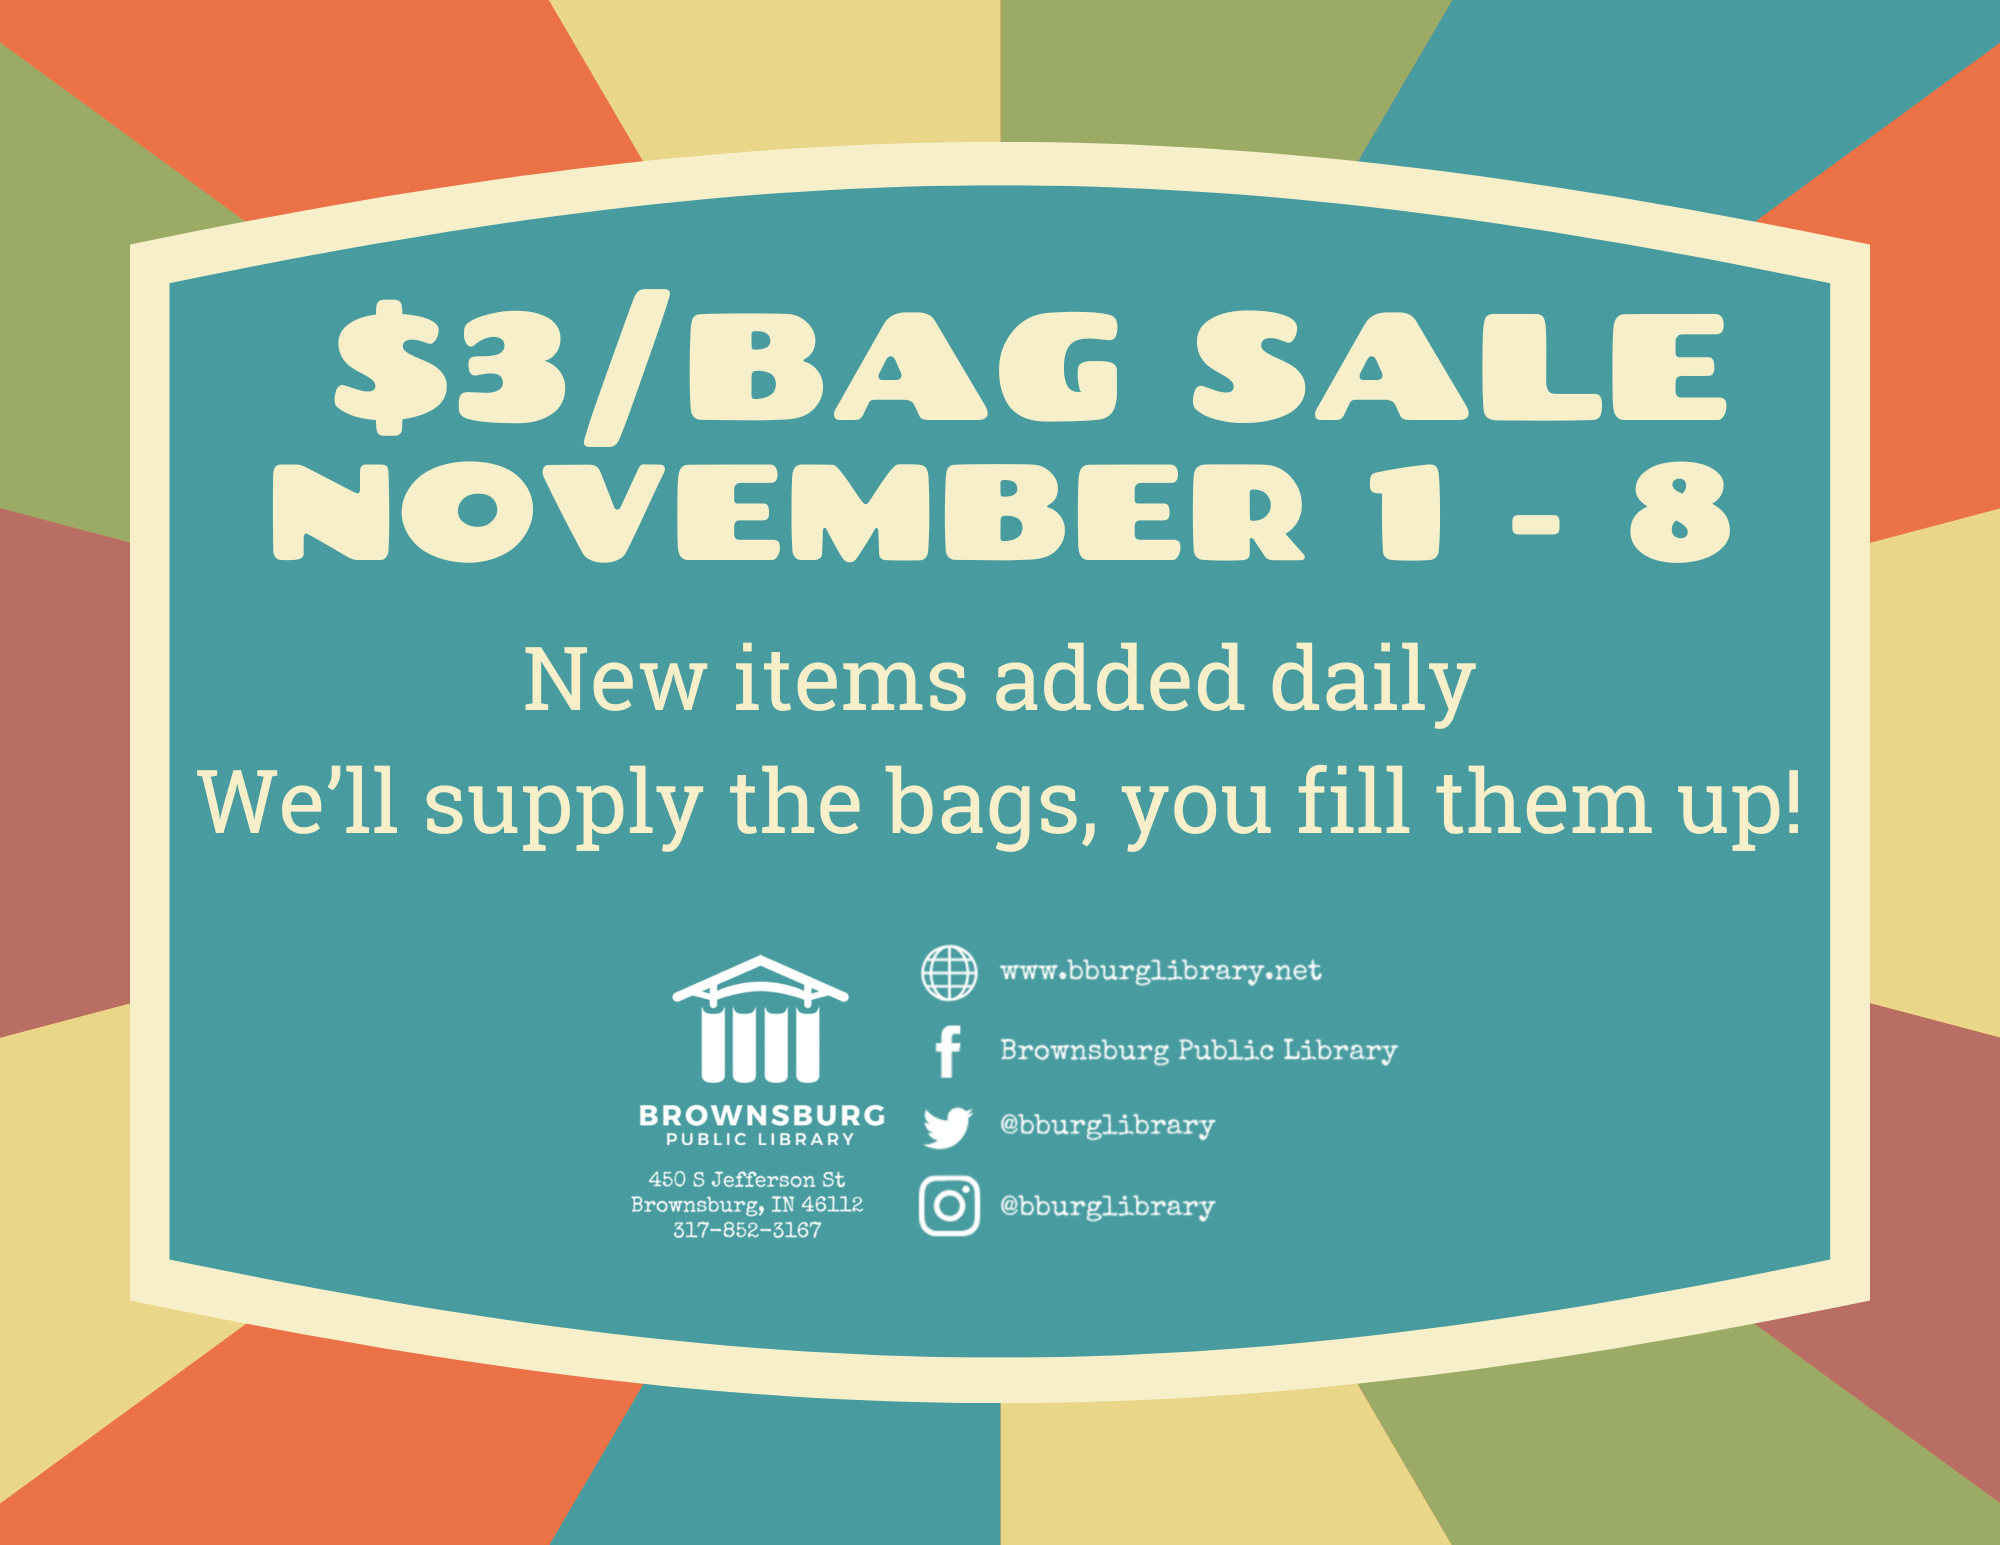 $3 Bag/Sale in Shop Used Bookstore - Inside Brownsburg Library